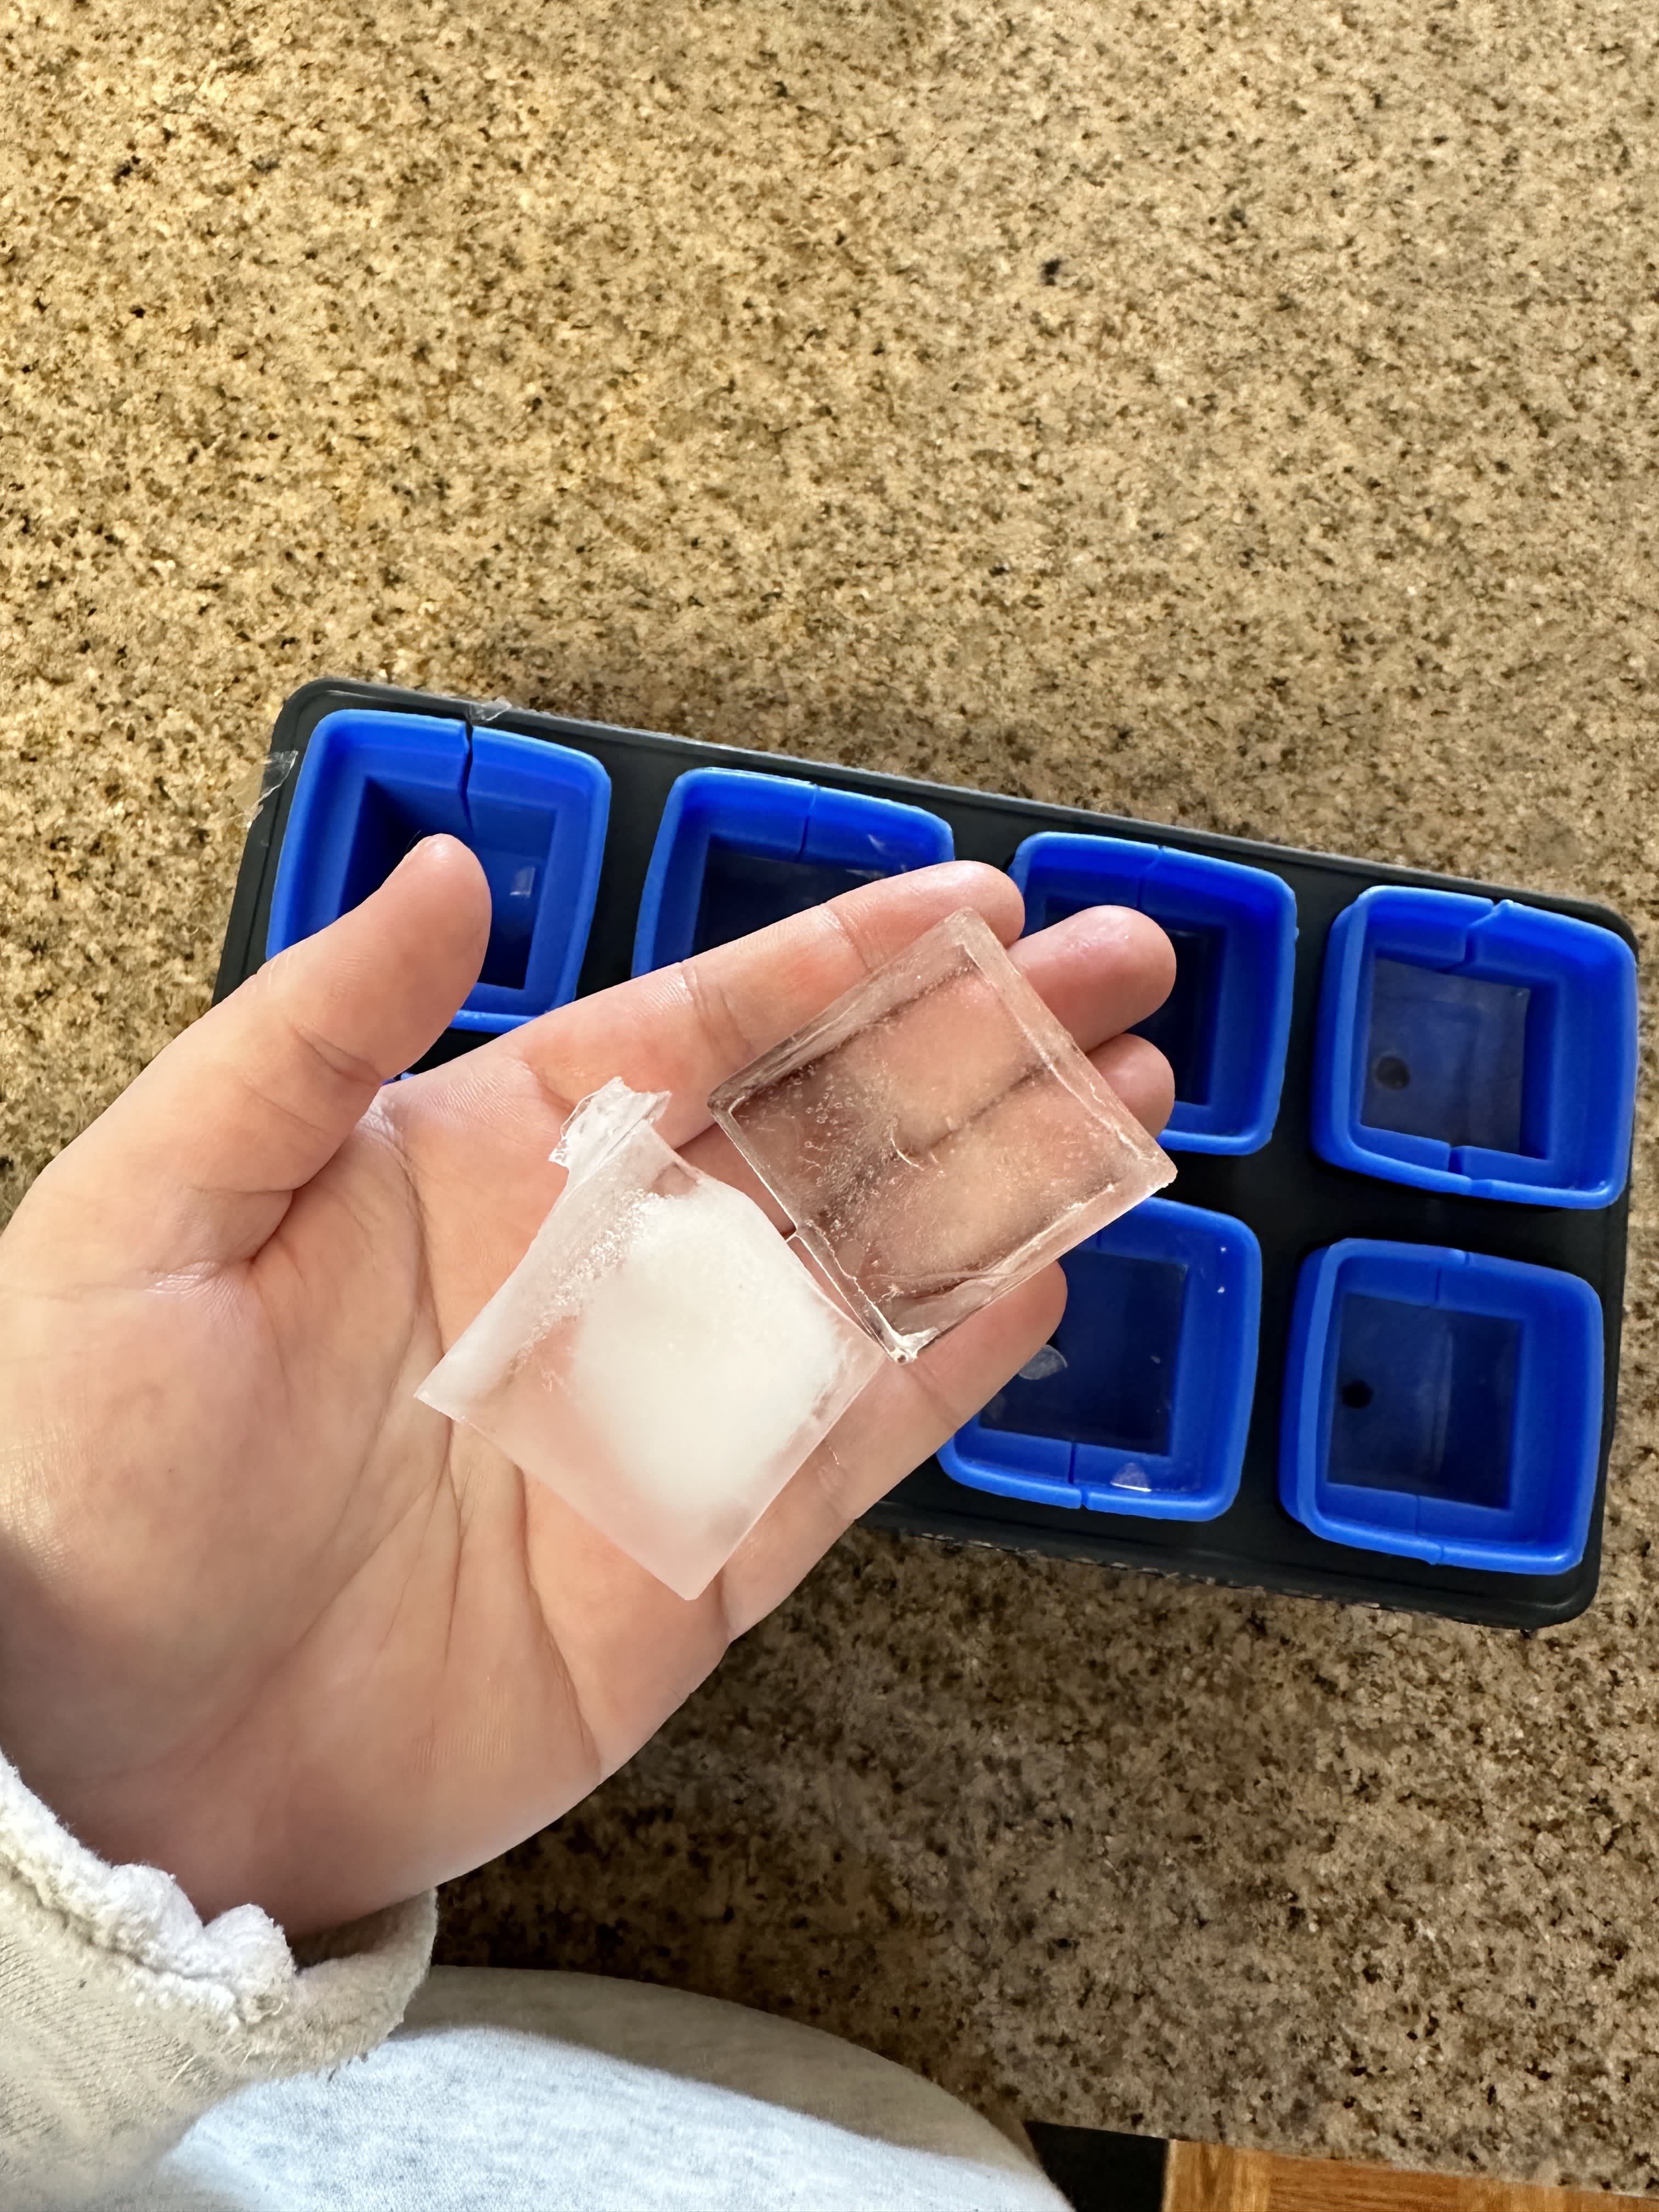 https://cdn.apartmenttherapy.info/image/upload/v1680711136/k/Edit/dexas-ice-ology-Silicone-Clear-Ice_Maker-Tray-review-3582.jpg